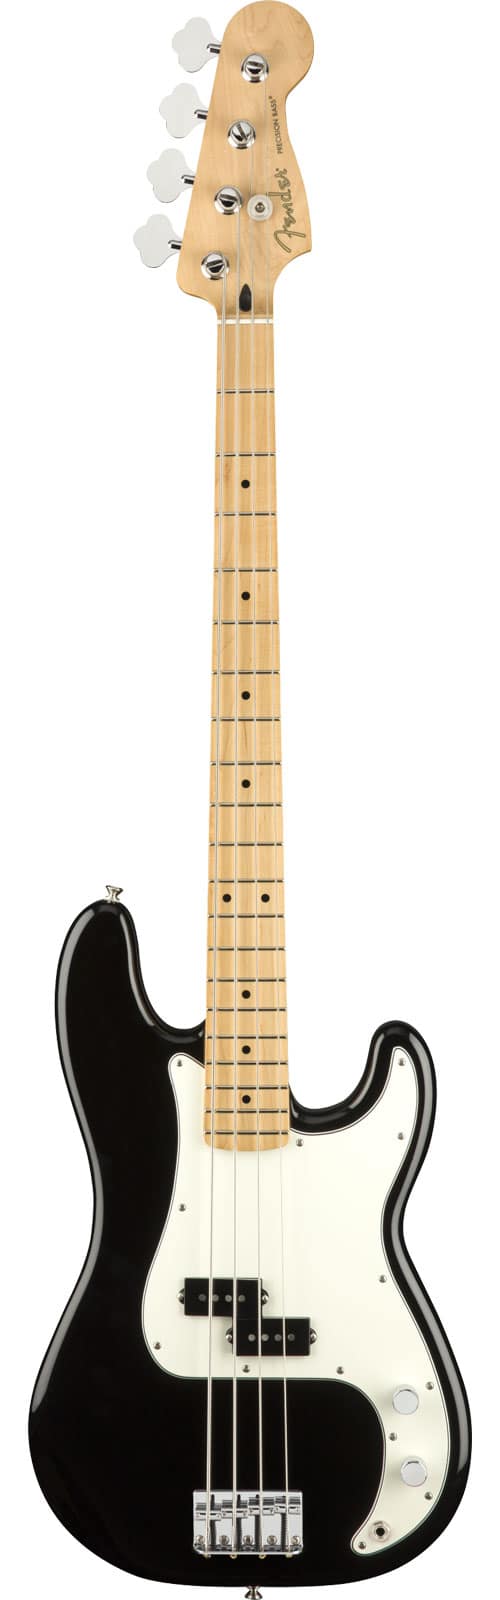 FENDER MEXICAN PLAYER PRECISION BASS MN, BLACK